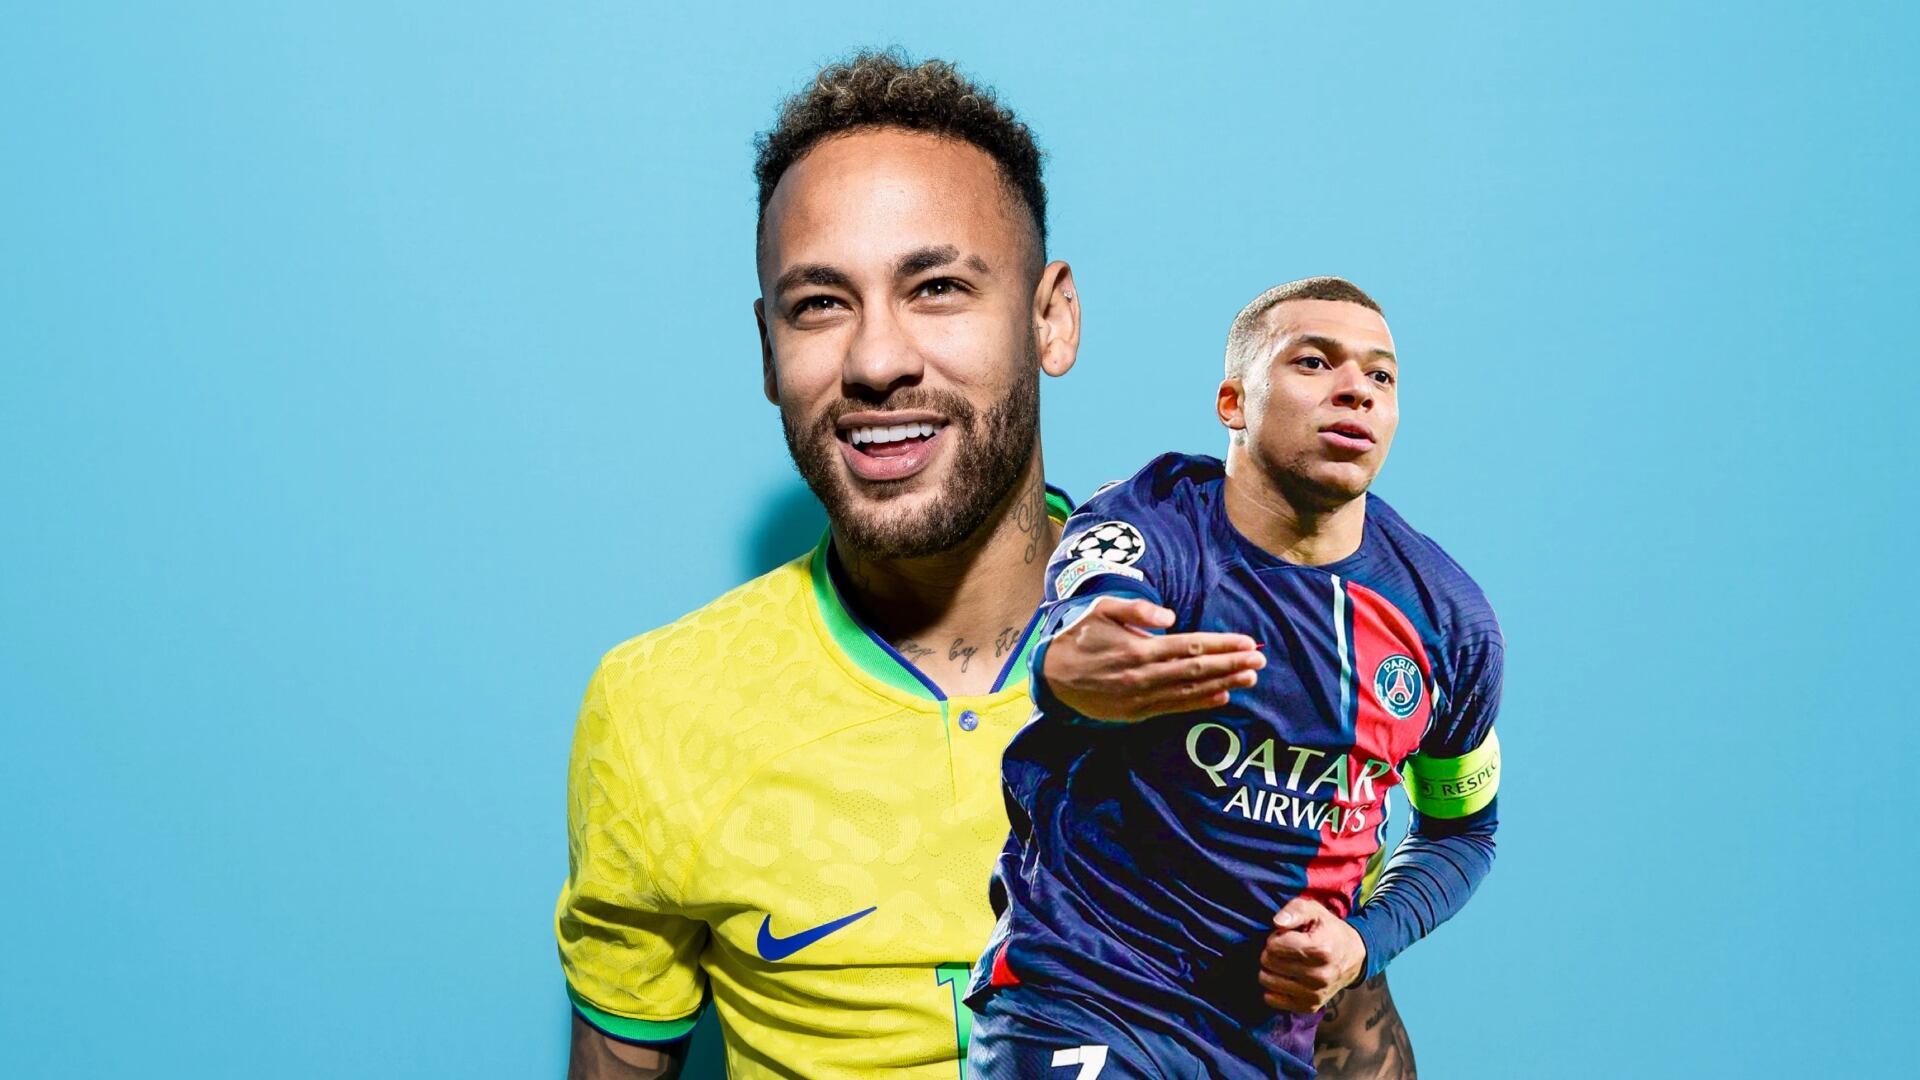 Neymar earns millions promoting alcoholic beverages, the fines Mbappé prefers to pay for not promoting them